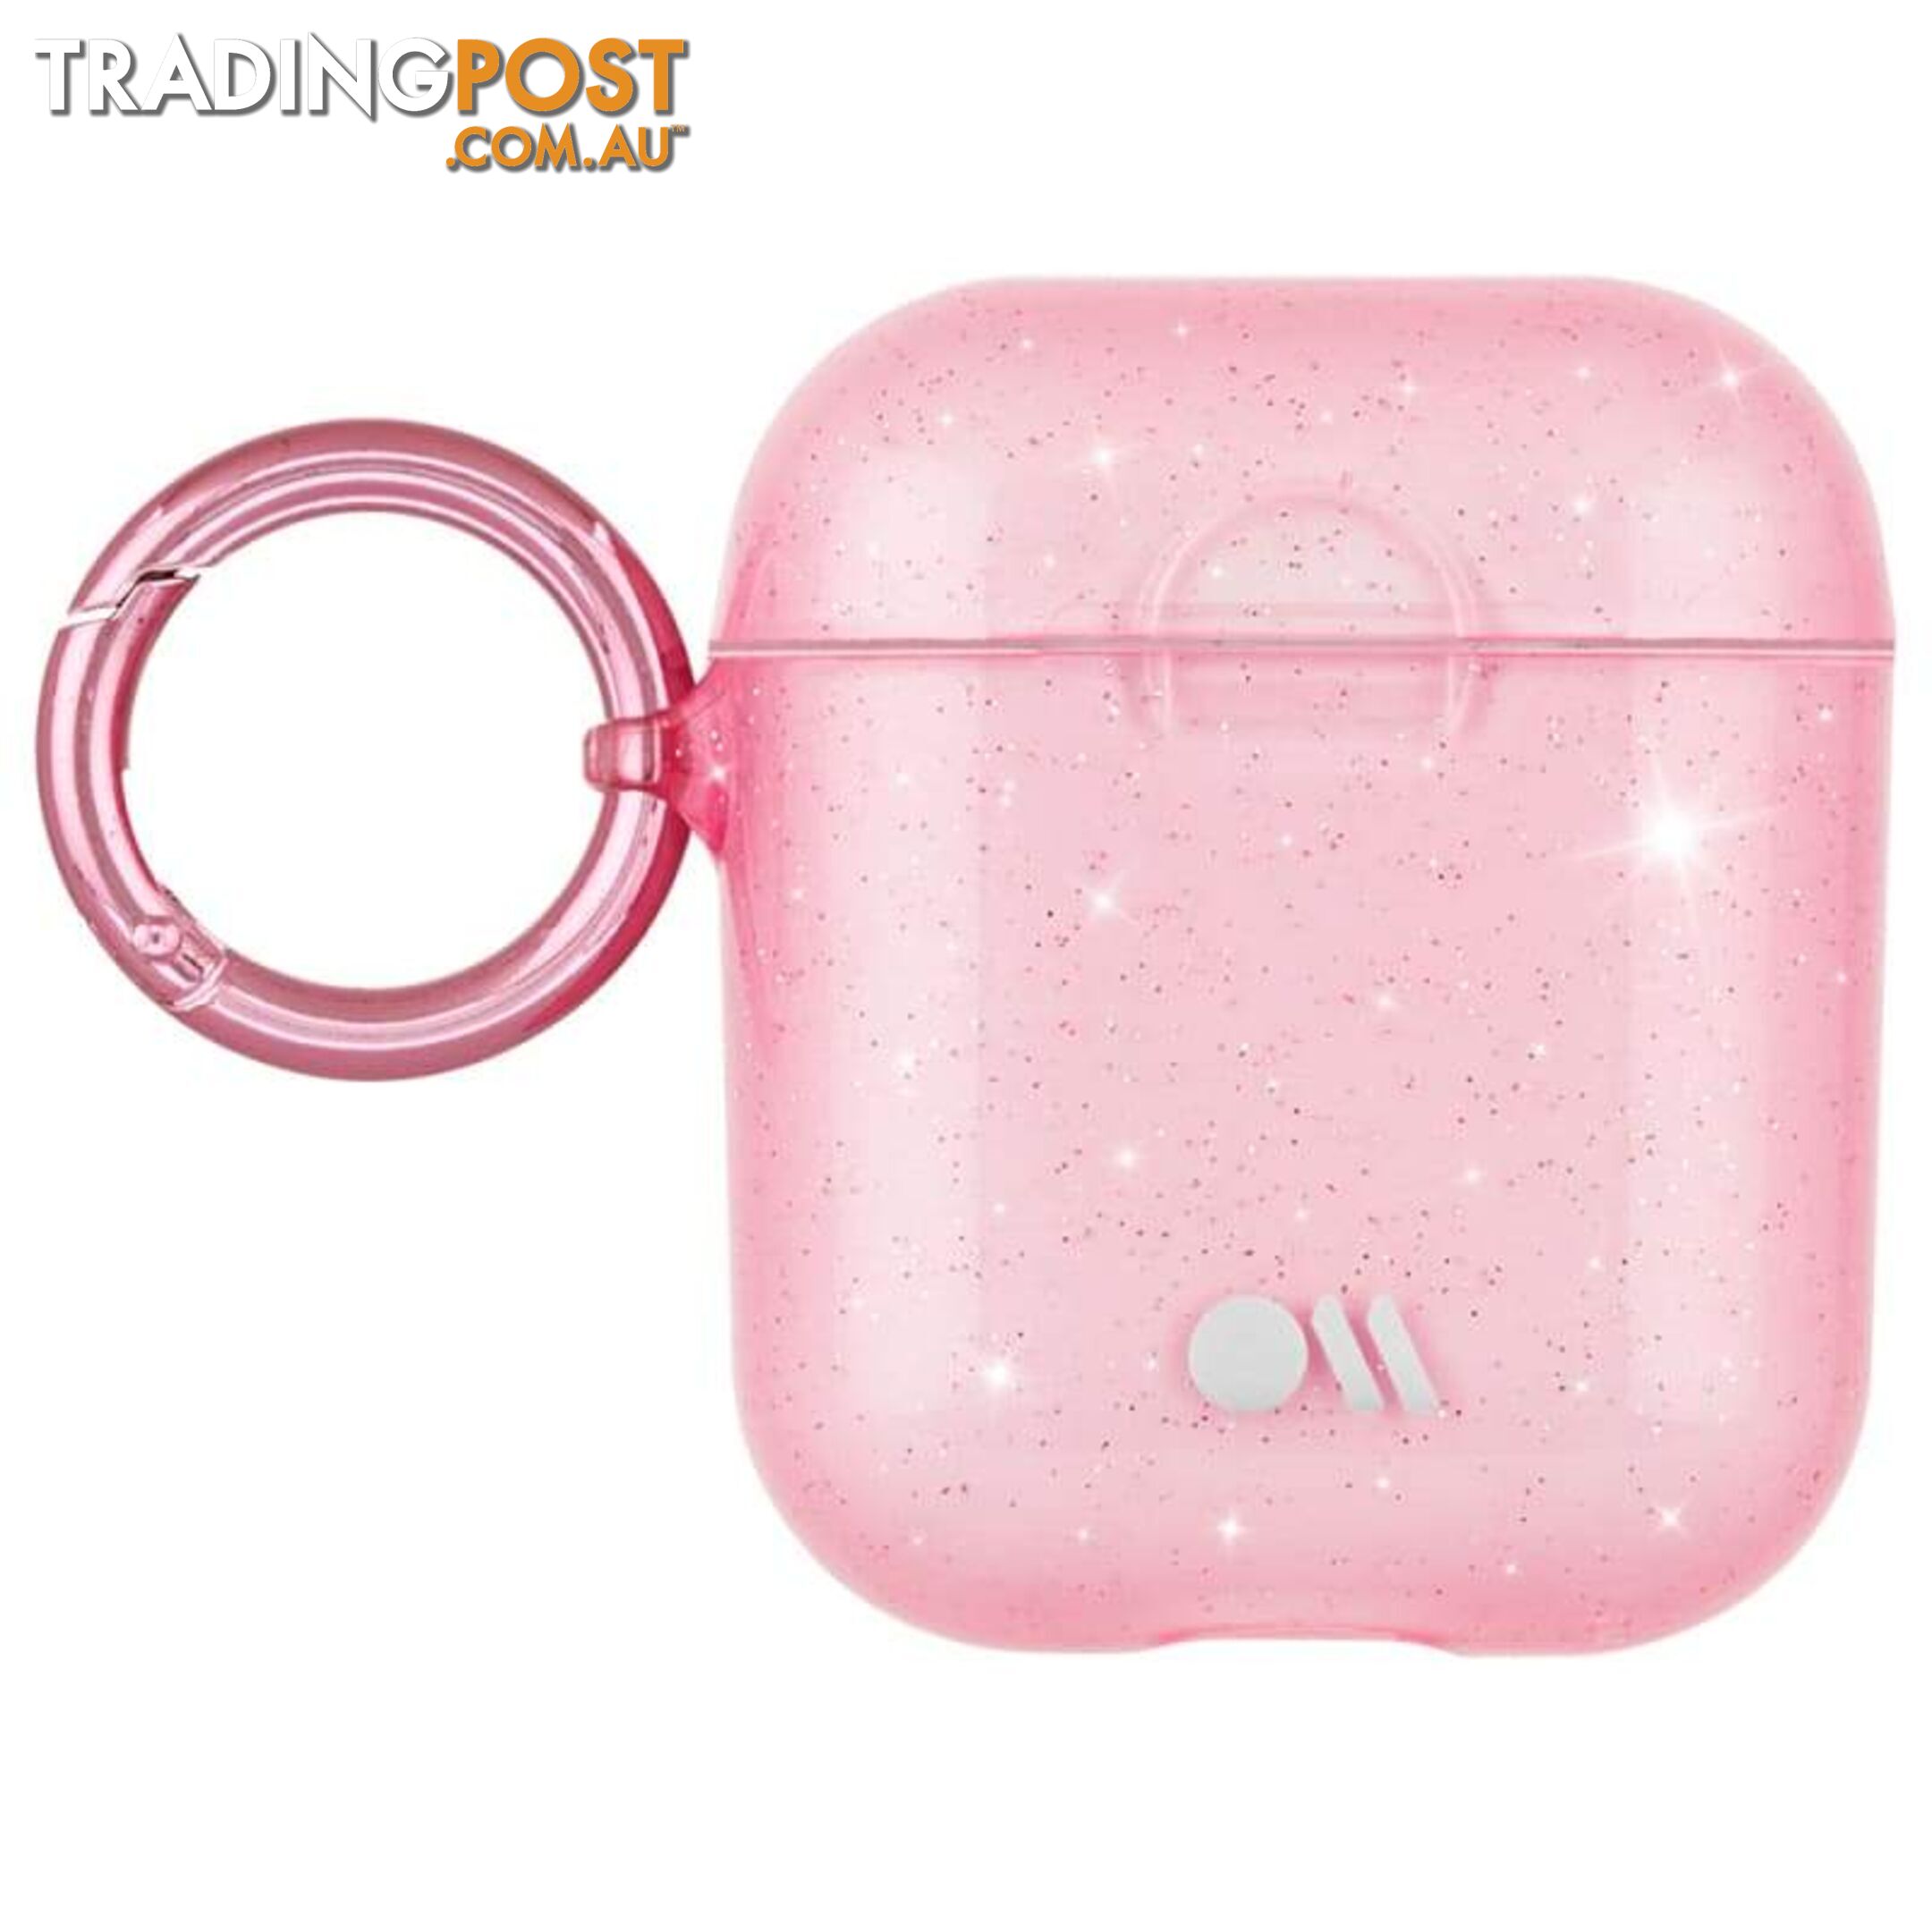 Case-Mate Flexible Case For Air Pods - Case-Mate - Pink - 846127184540